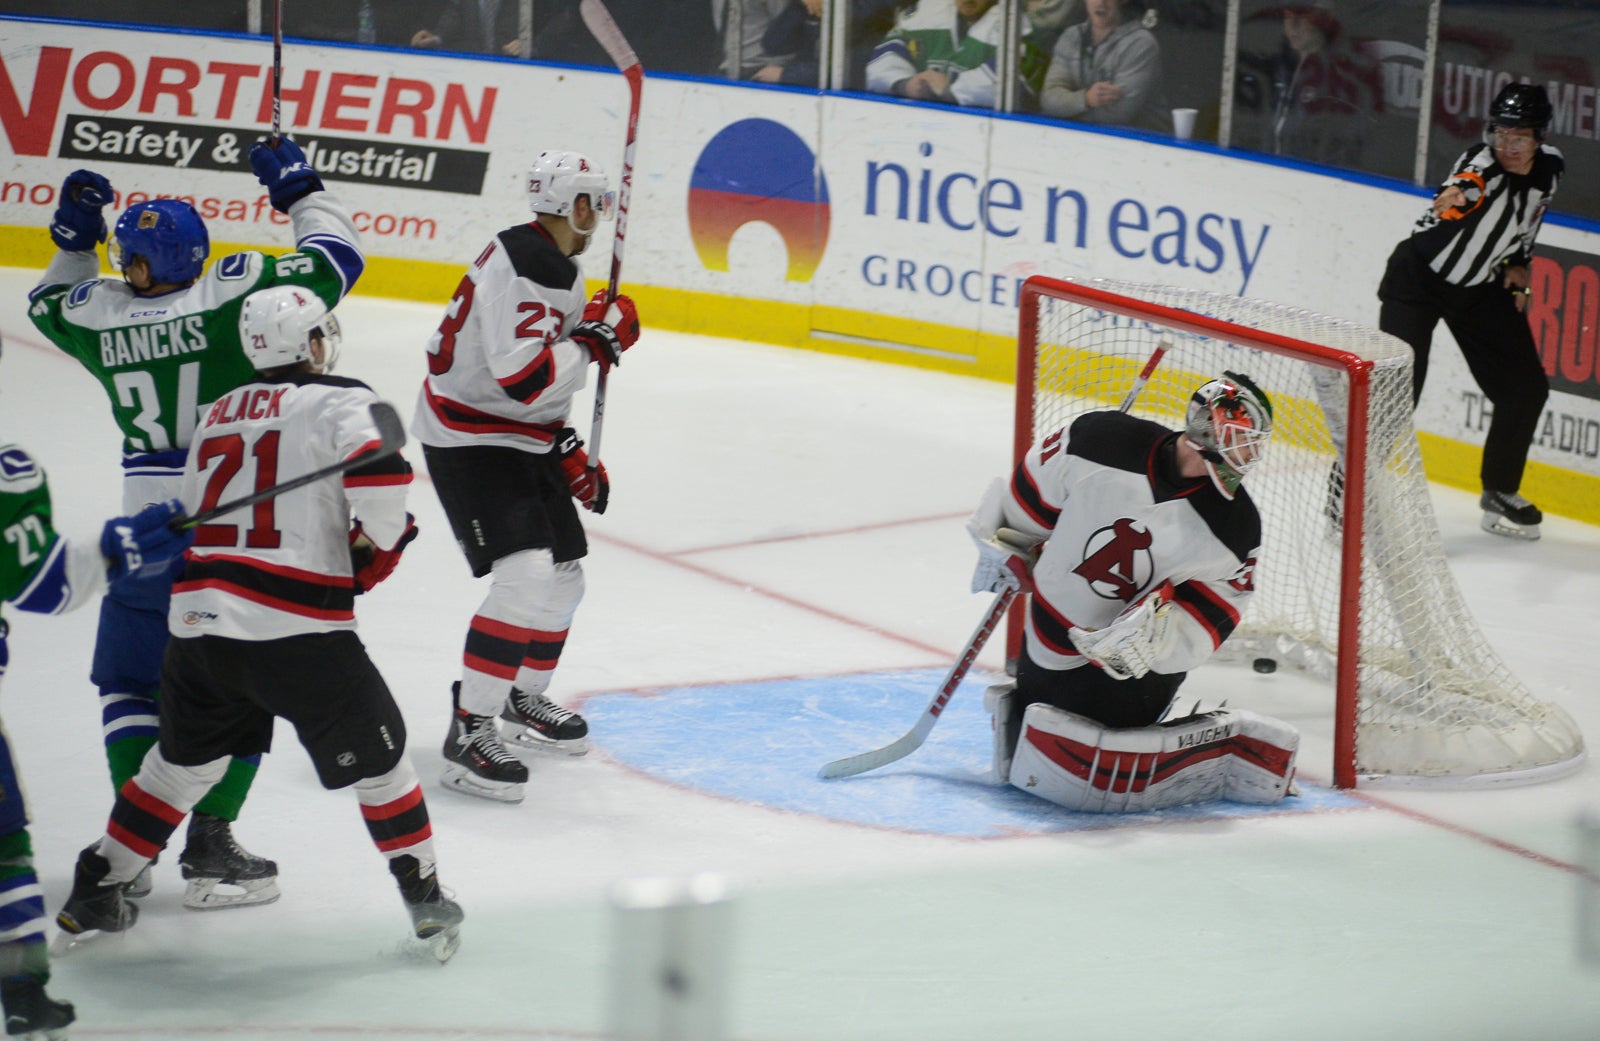 Comets Make History with OT Win Utica Comets Official Website